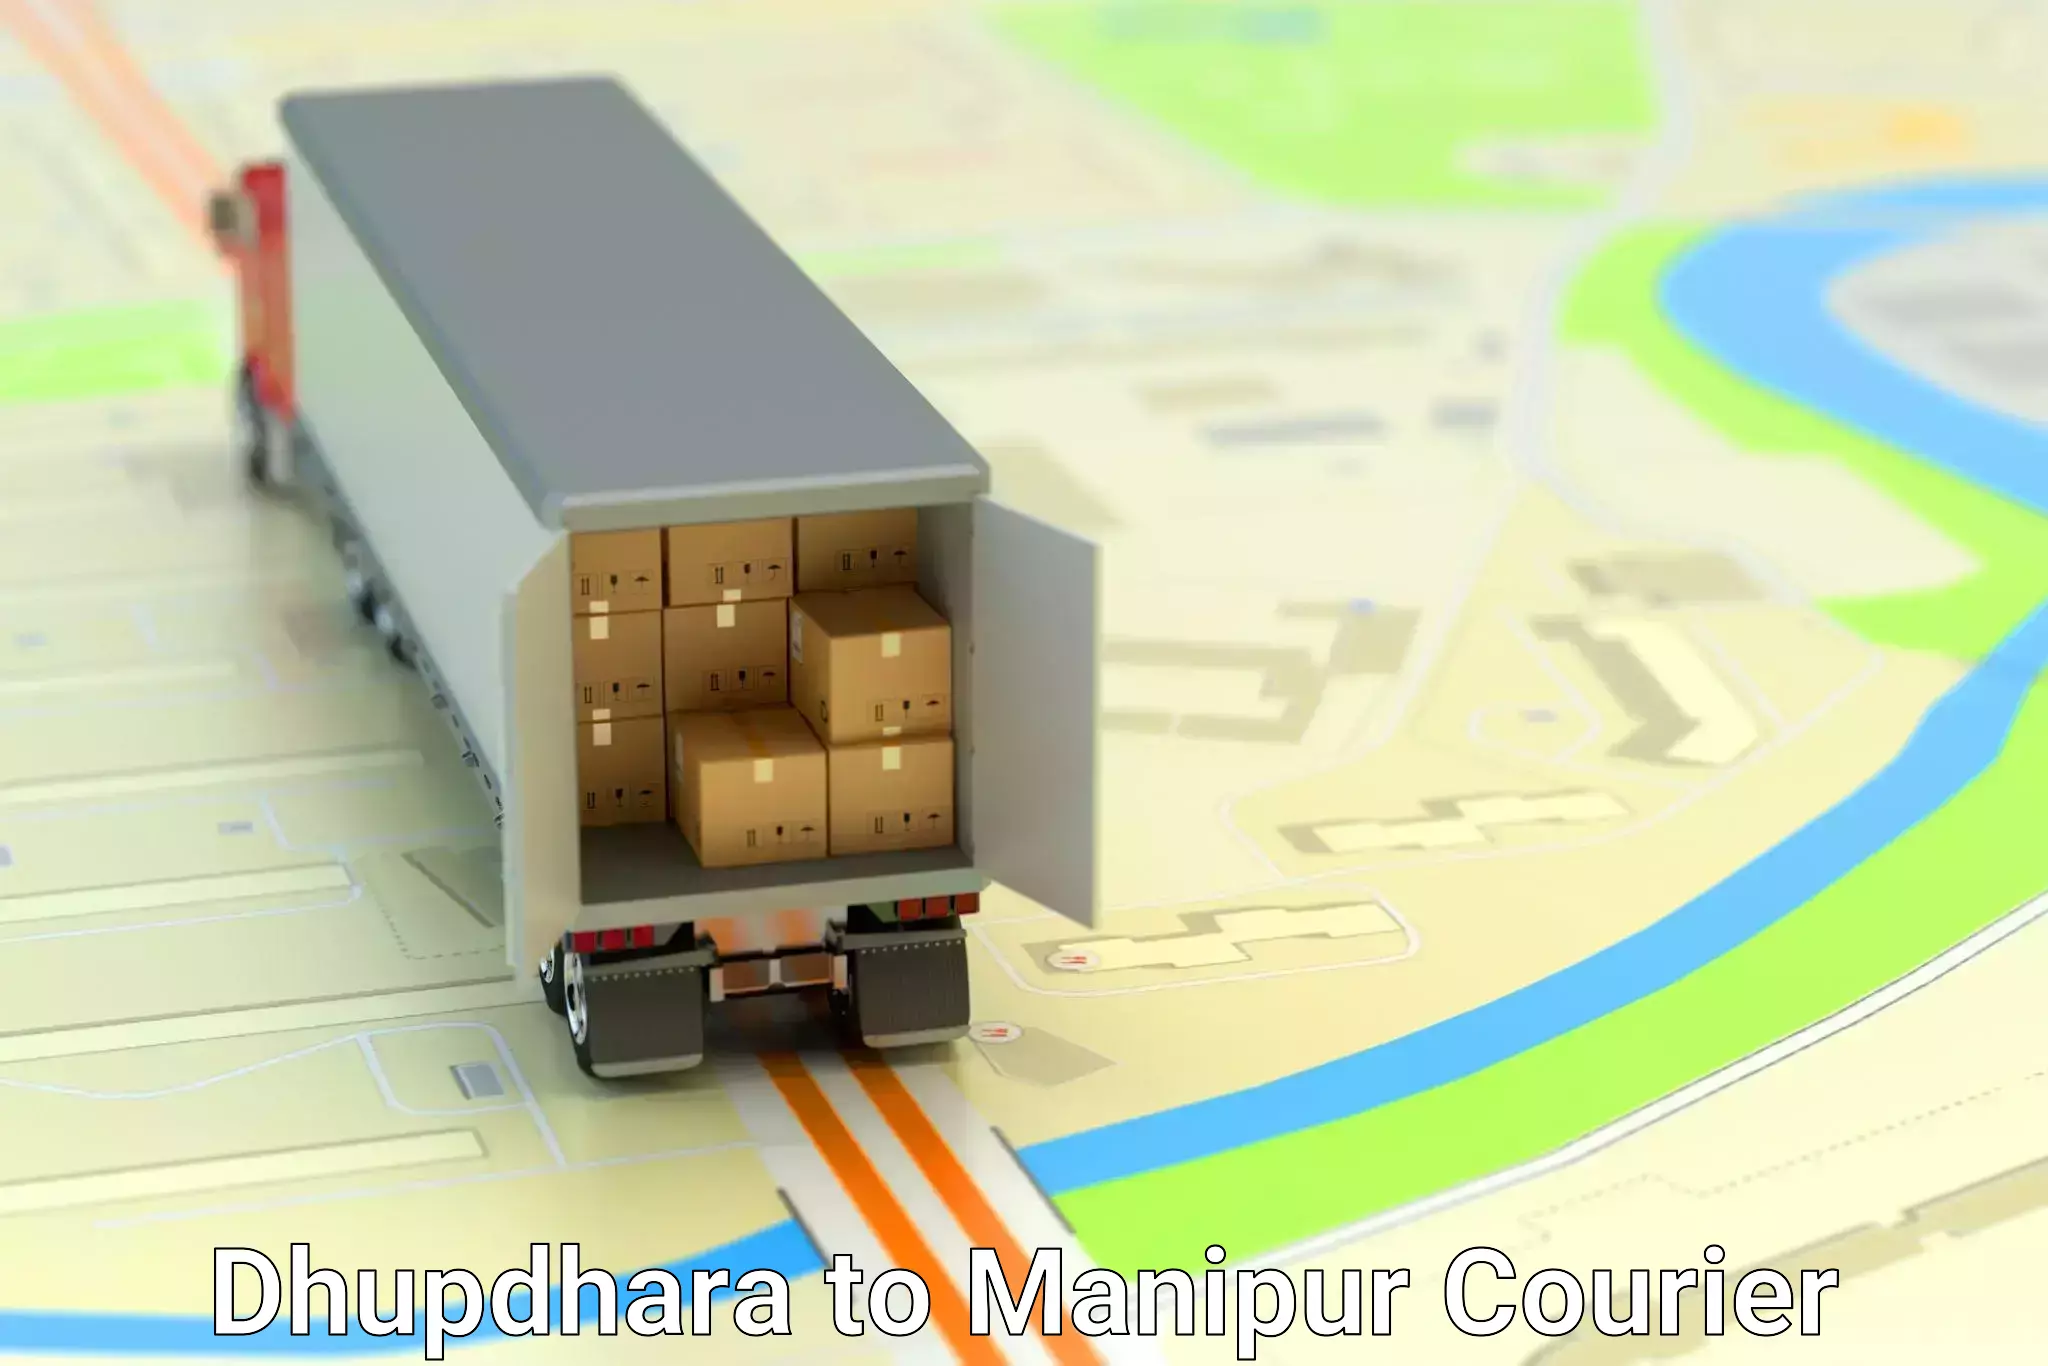 State-of-the-art courier technology Dhupdhara to Moirang